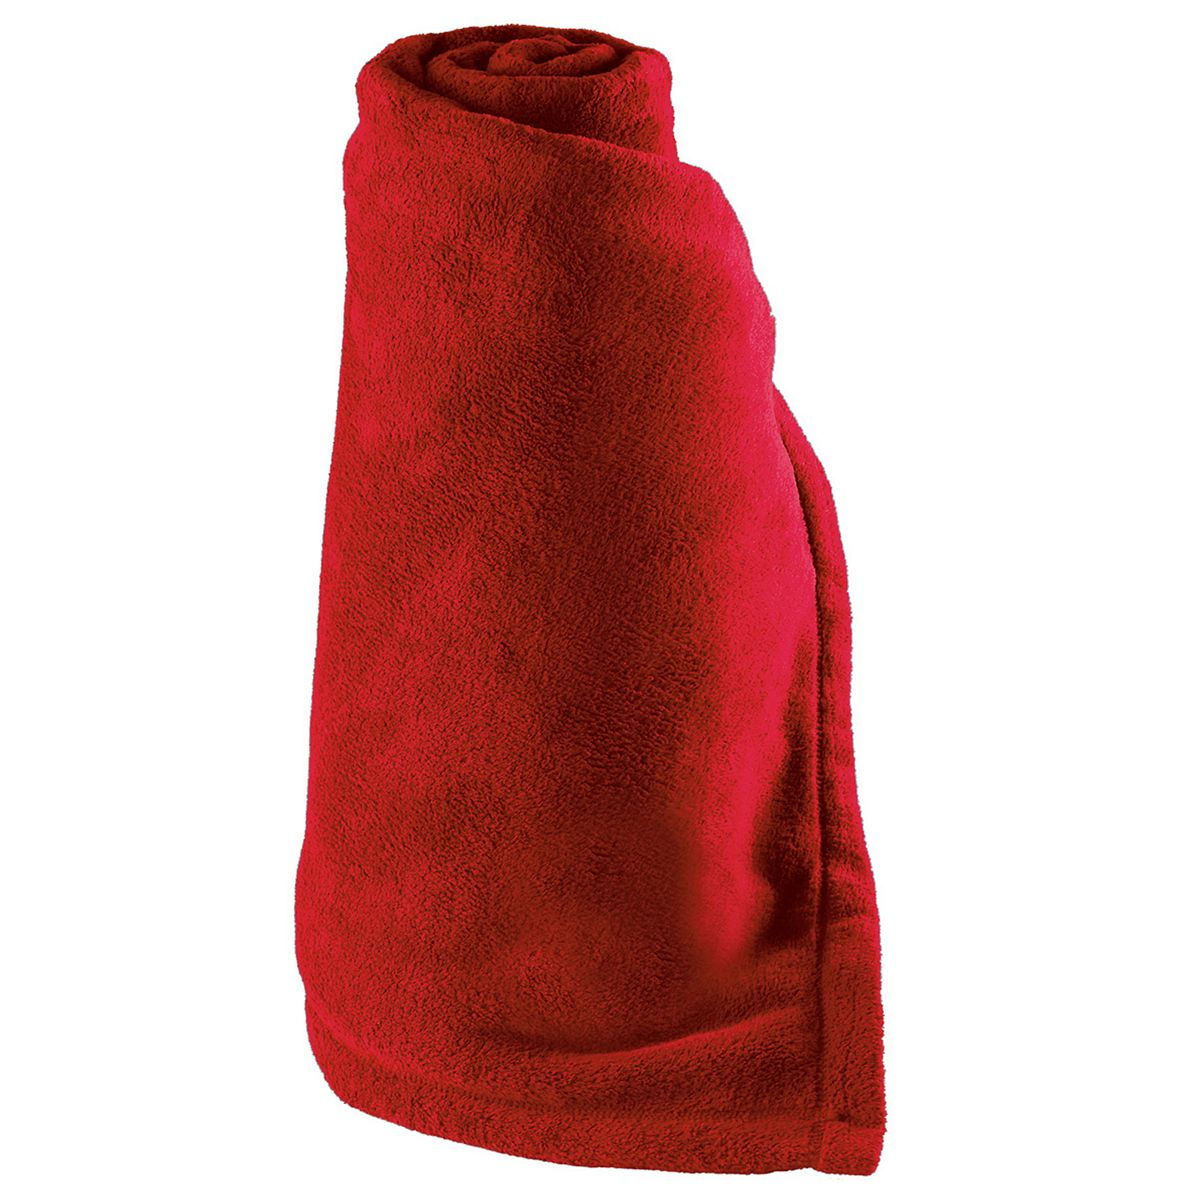 Picture of Holloway 223856.083.OS Tailgate Blanket, Scarlet - One Size